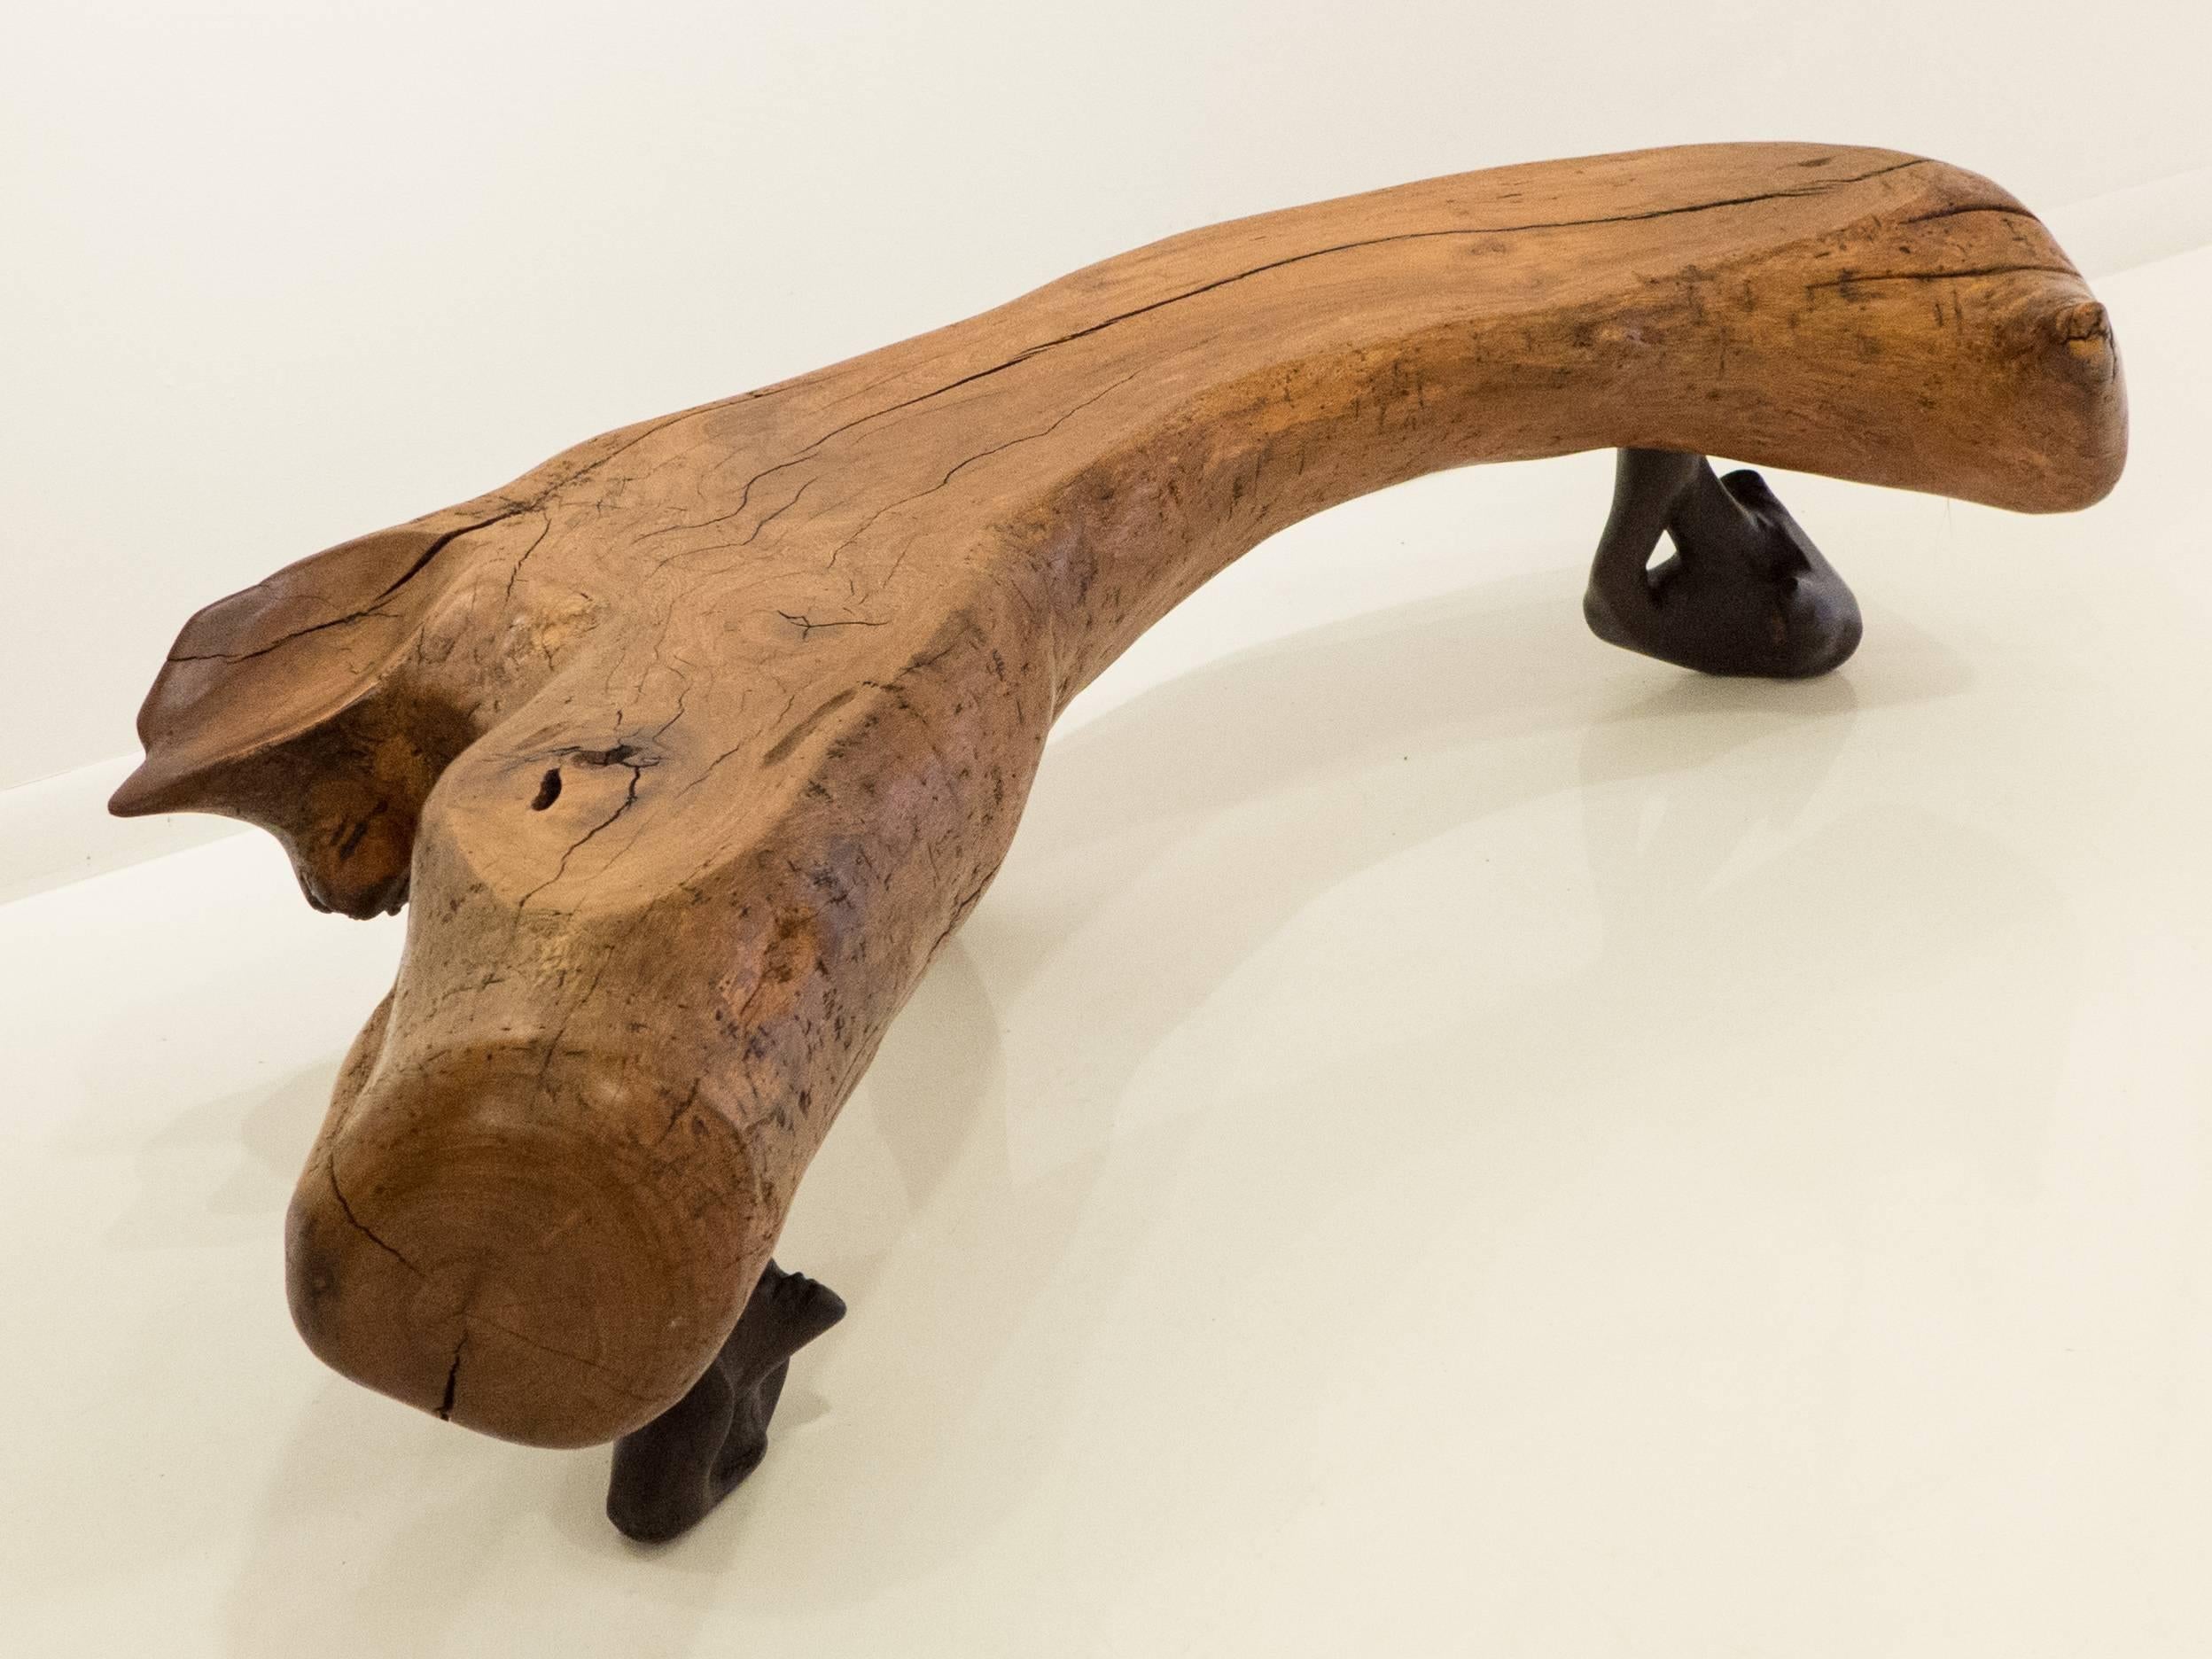 Dramatic and vaguely anthropomorphic, live edge bench or table comprising a curvilinear Sabino wood trunk section with a fork at one end, mounted on three sculptural burl rosewood legs each with its own sculptural character, attached with mortise